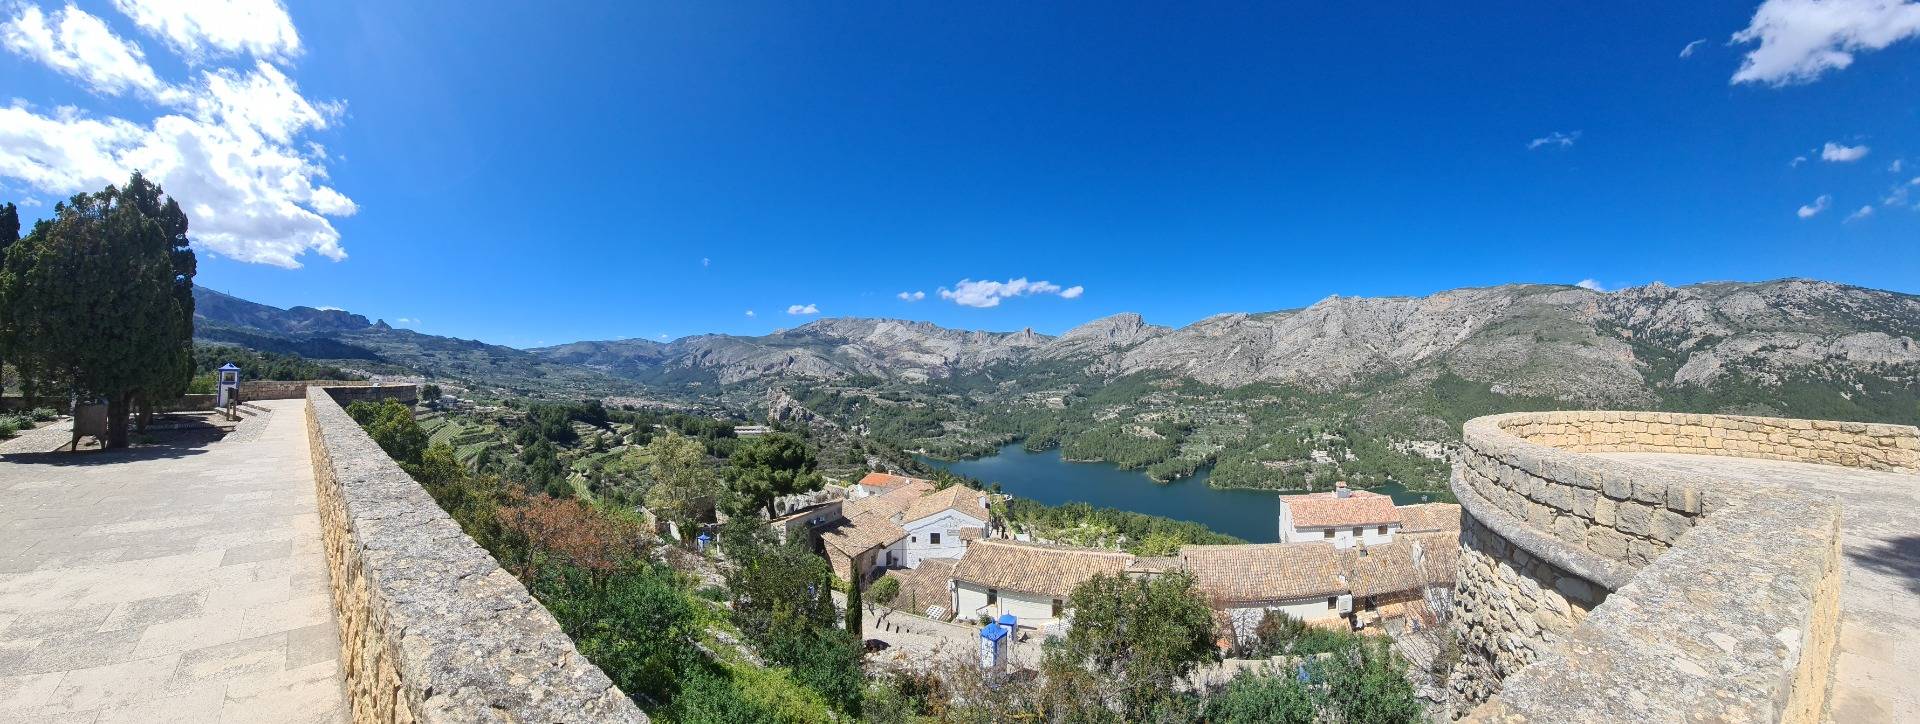 Panoramic view of the reservoir from the castle tower.